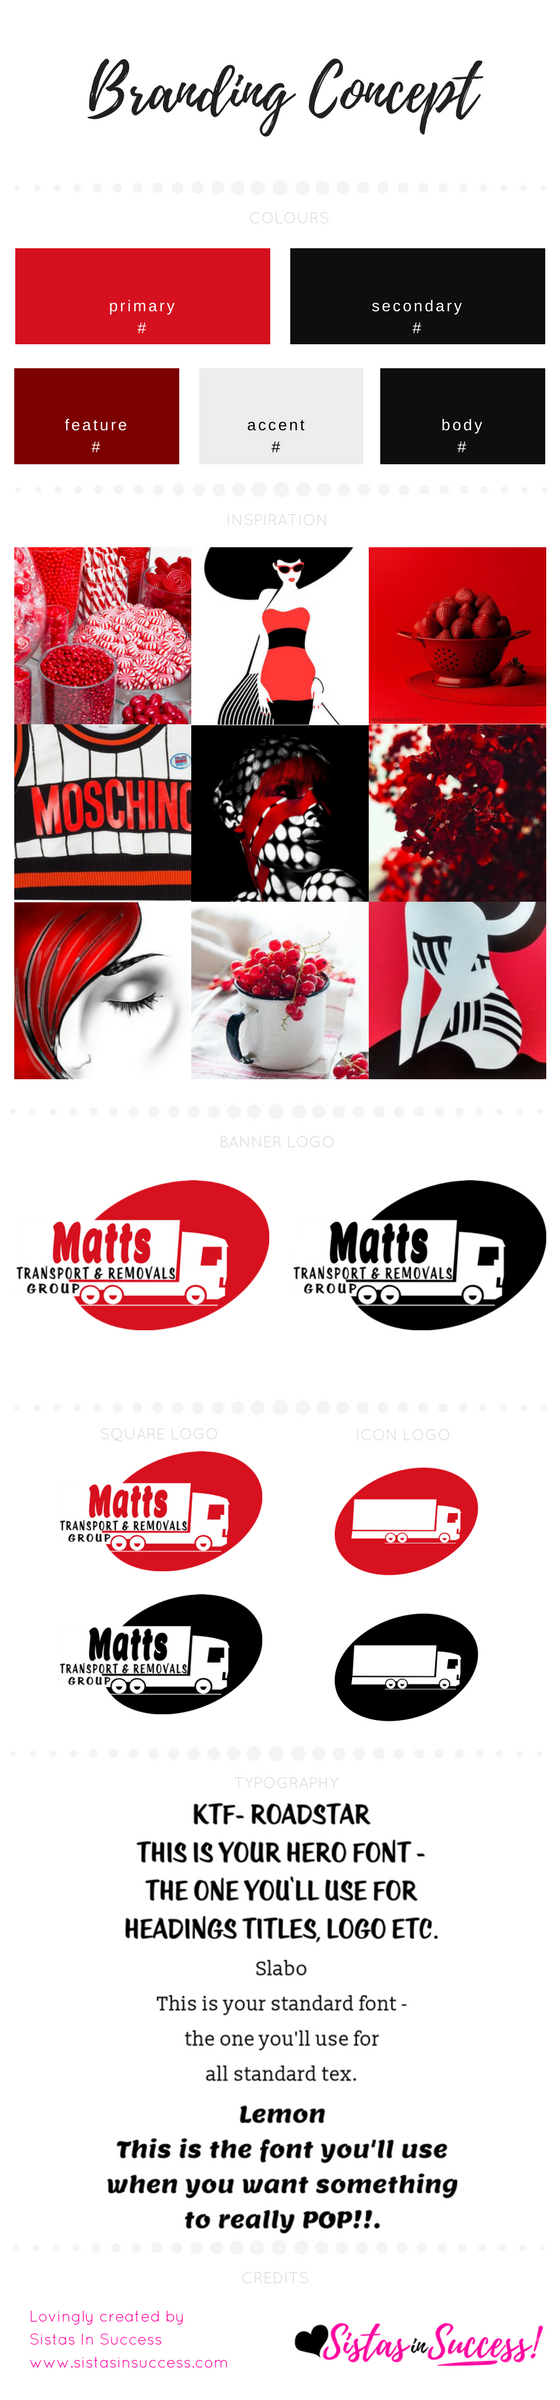 Matts Transport & Removal Group Branding Concept R2